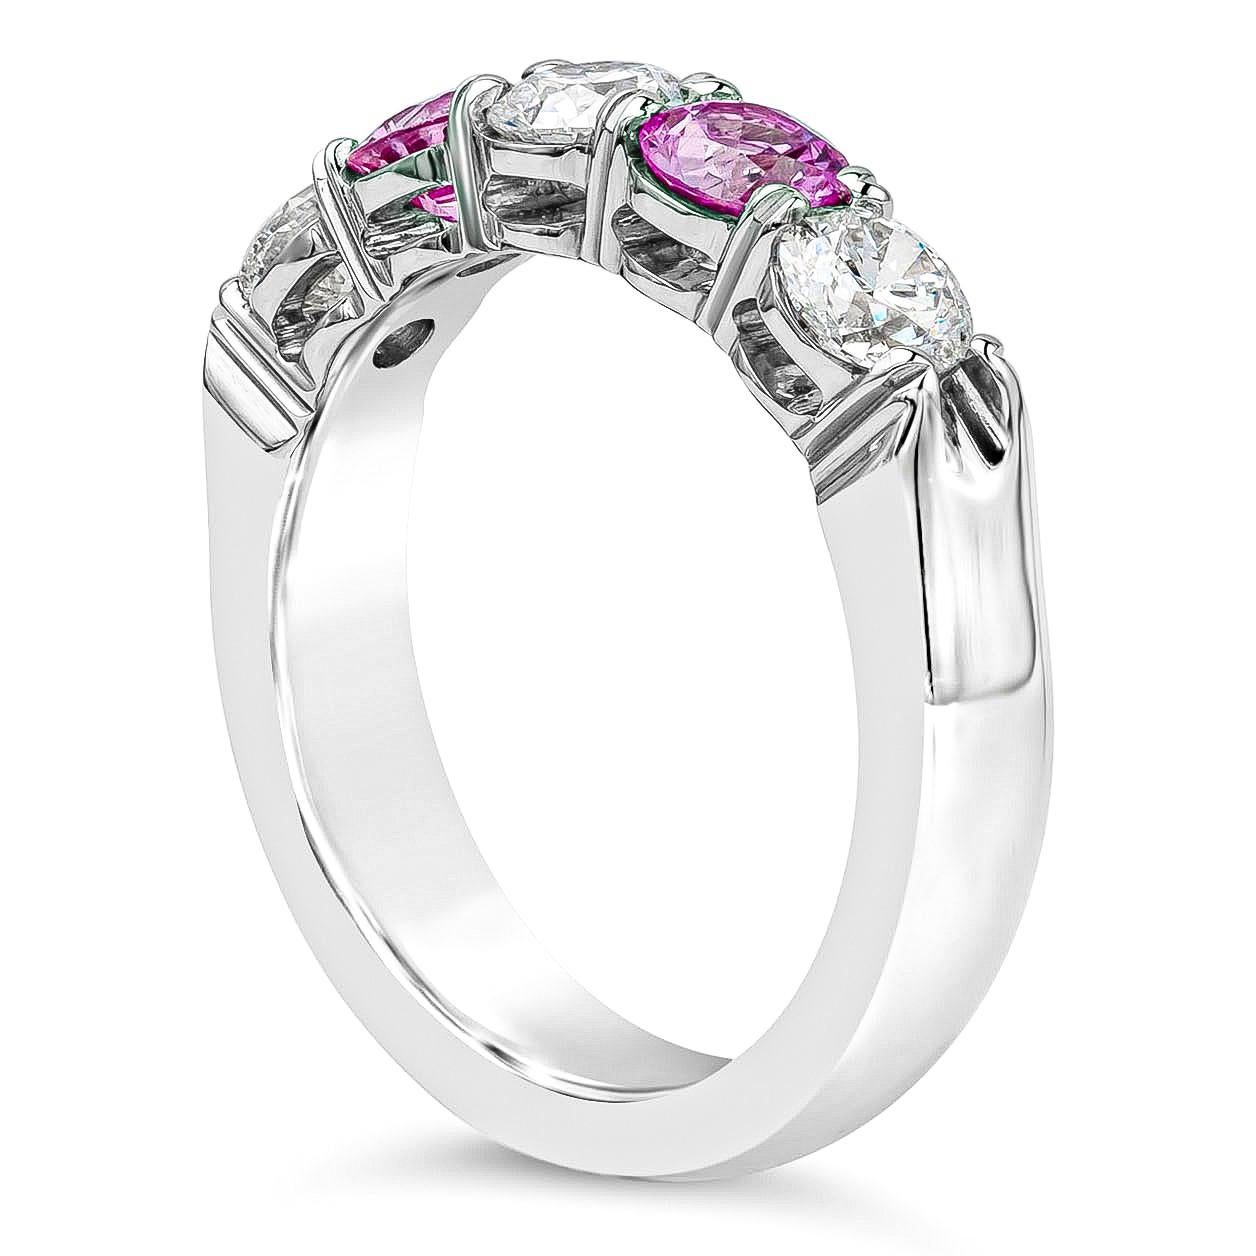 A fashionable five-stone wedding band ring style showcasing vibrant pink sapphires weighing 0.72 carats, that alternates with round brilliant diamonds weighing 0.90 carats. Mounted in a shared-prong setting, Made with Platinum. Size 6.5 US 

Roman